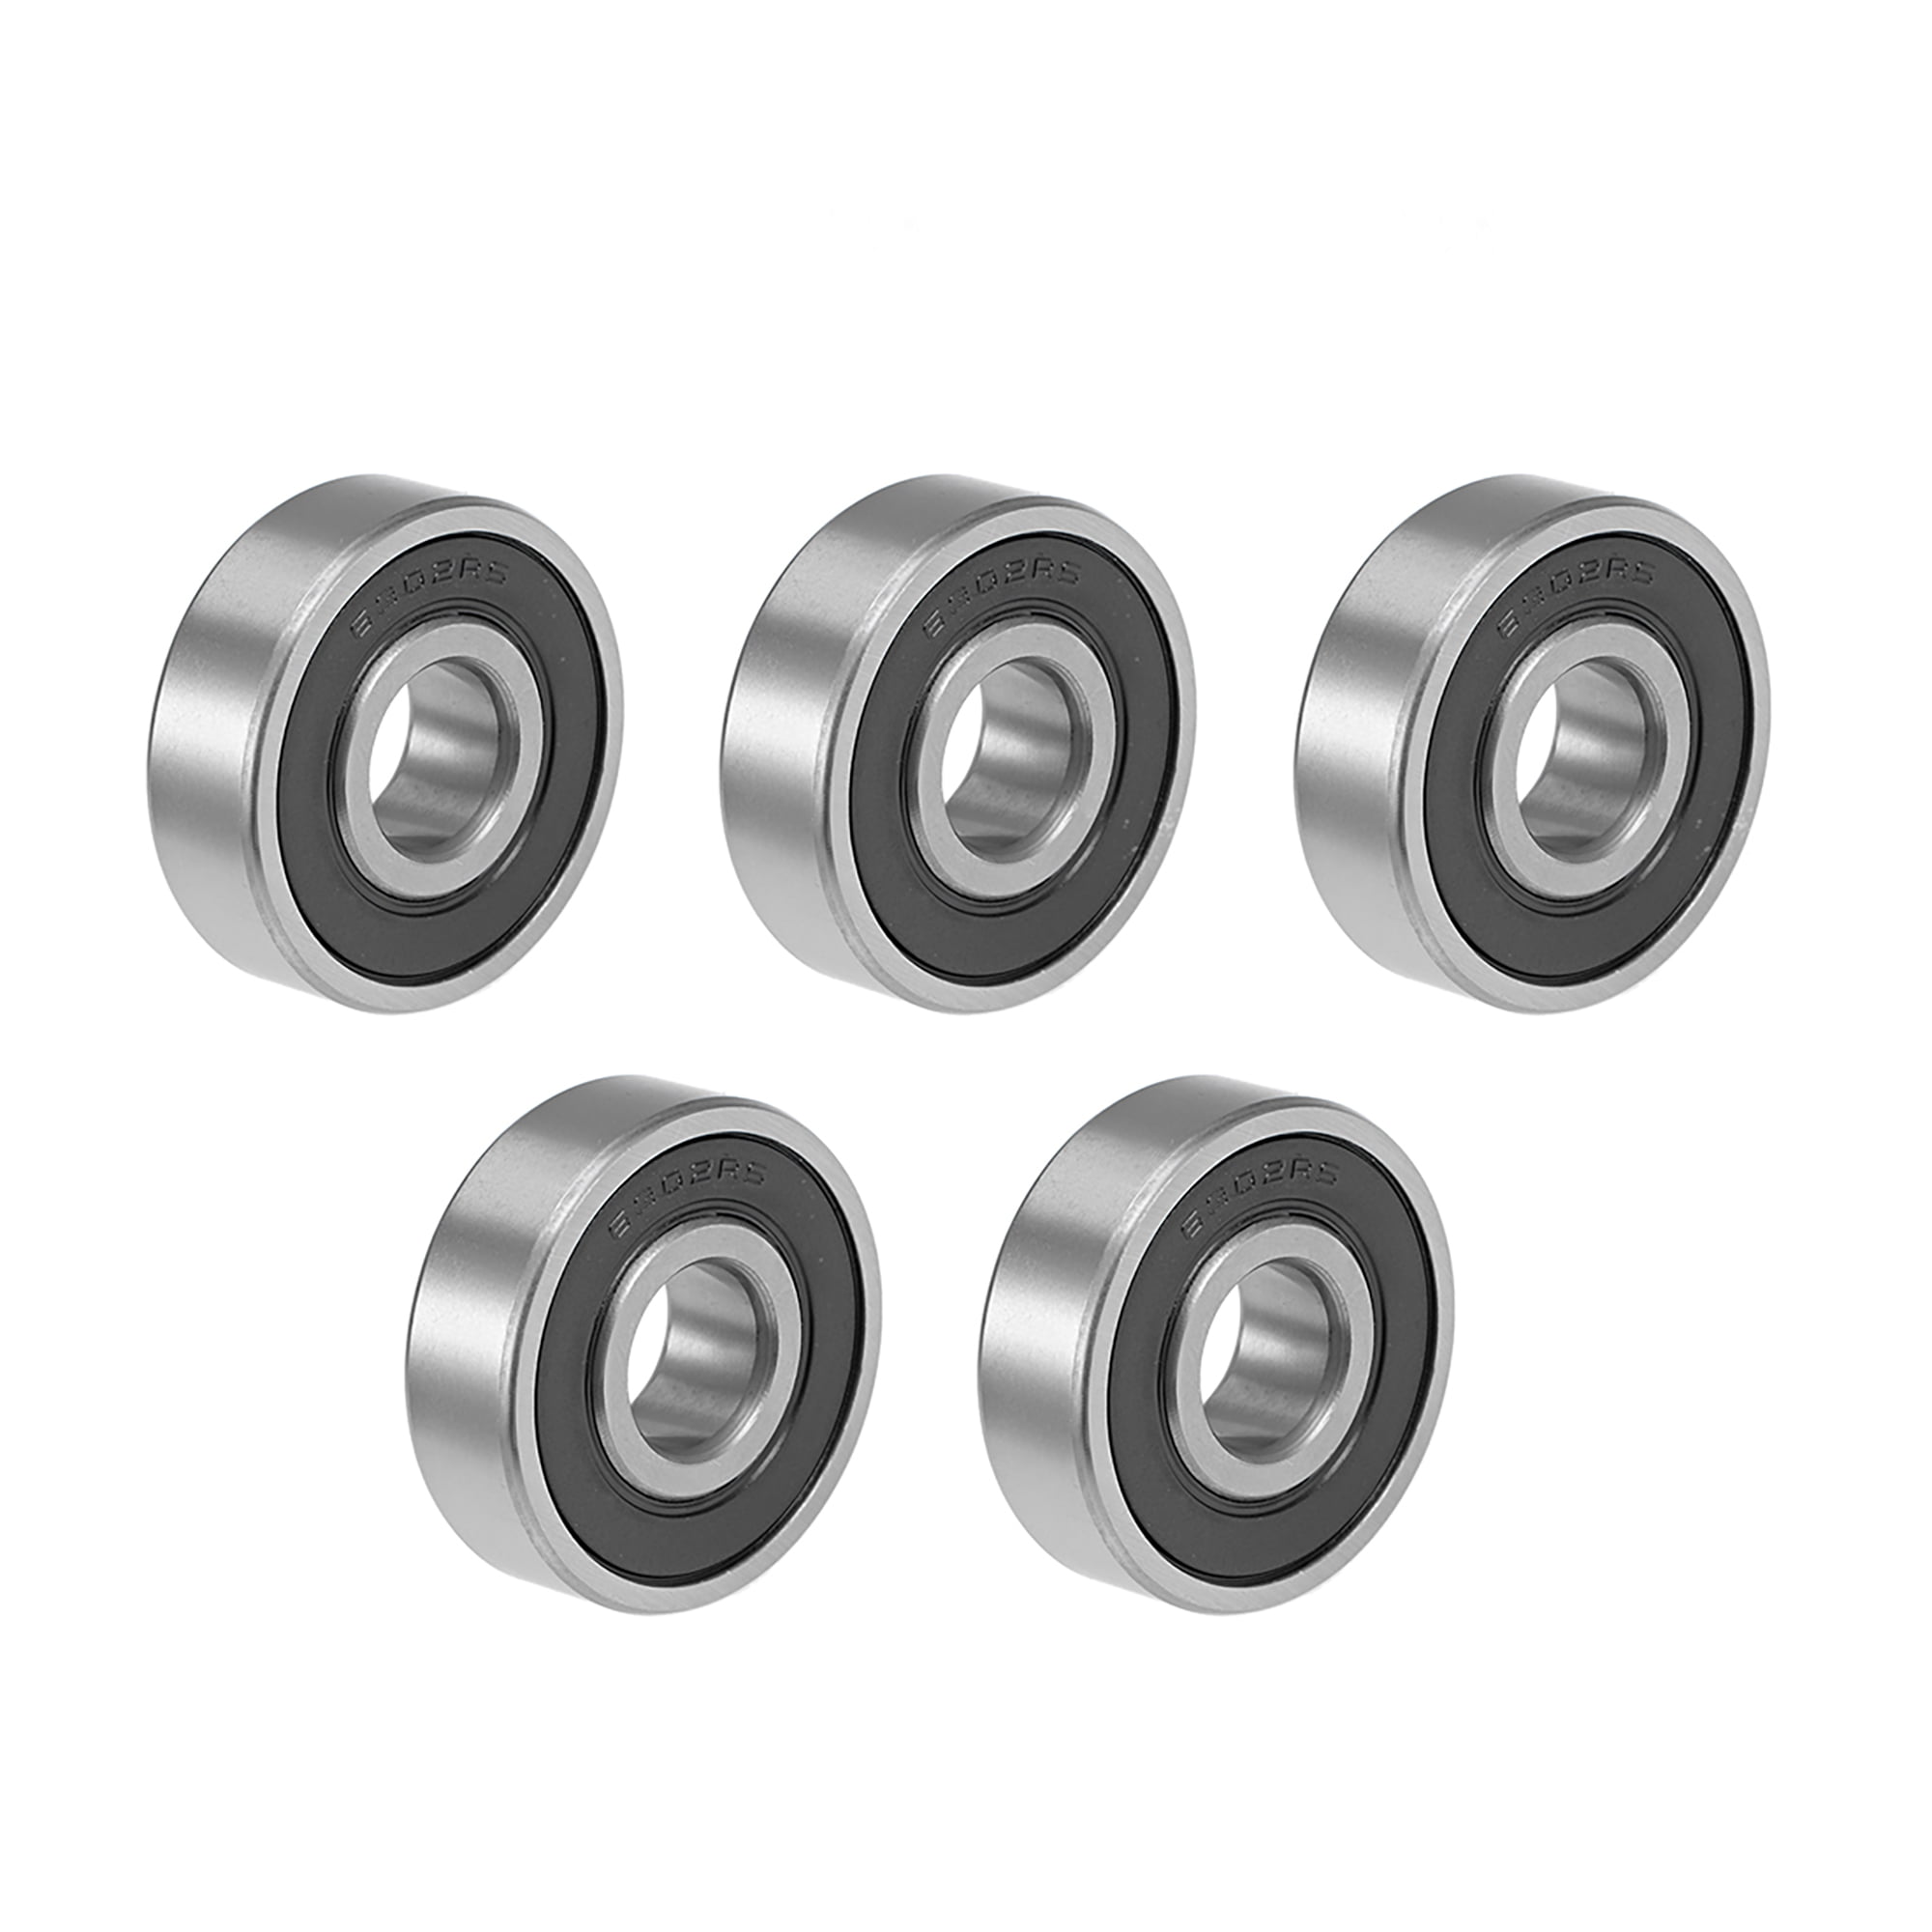 62012RS 12x32x10mm Bearing steel Deep Groove Ball Bearings Rubber Cover Silver Pack of 5 